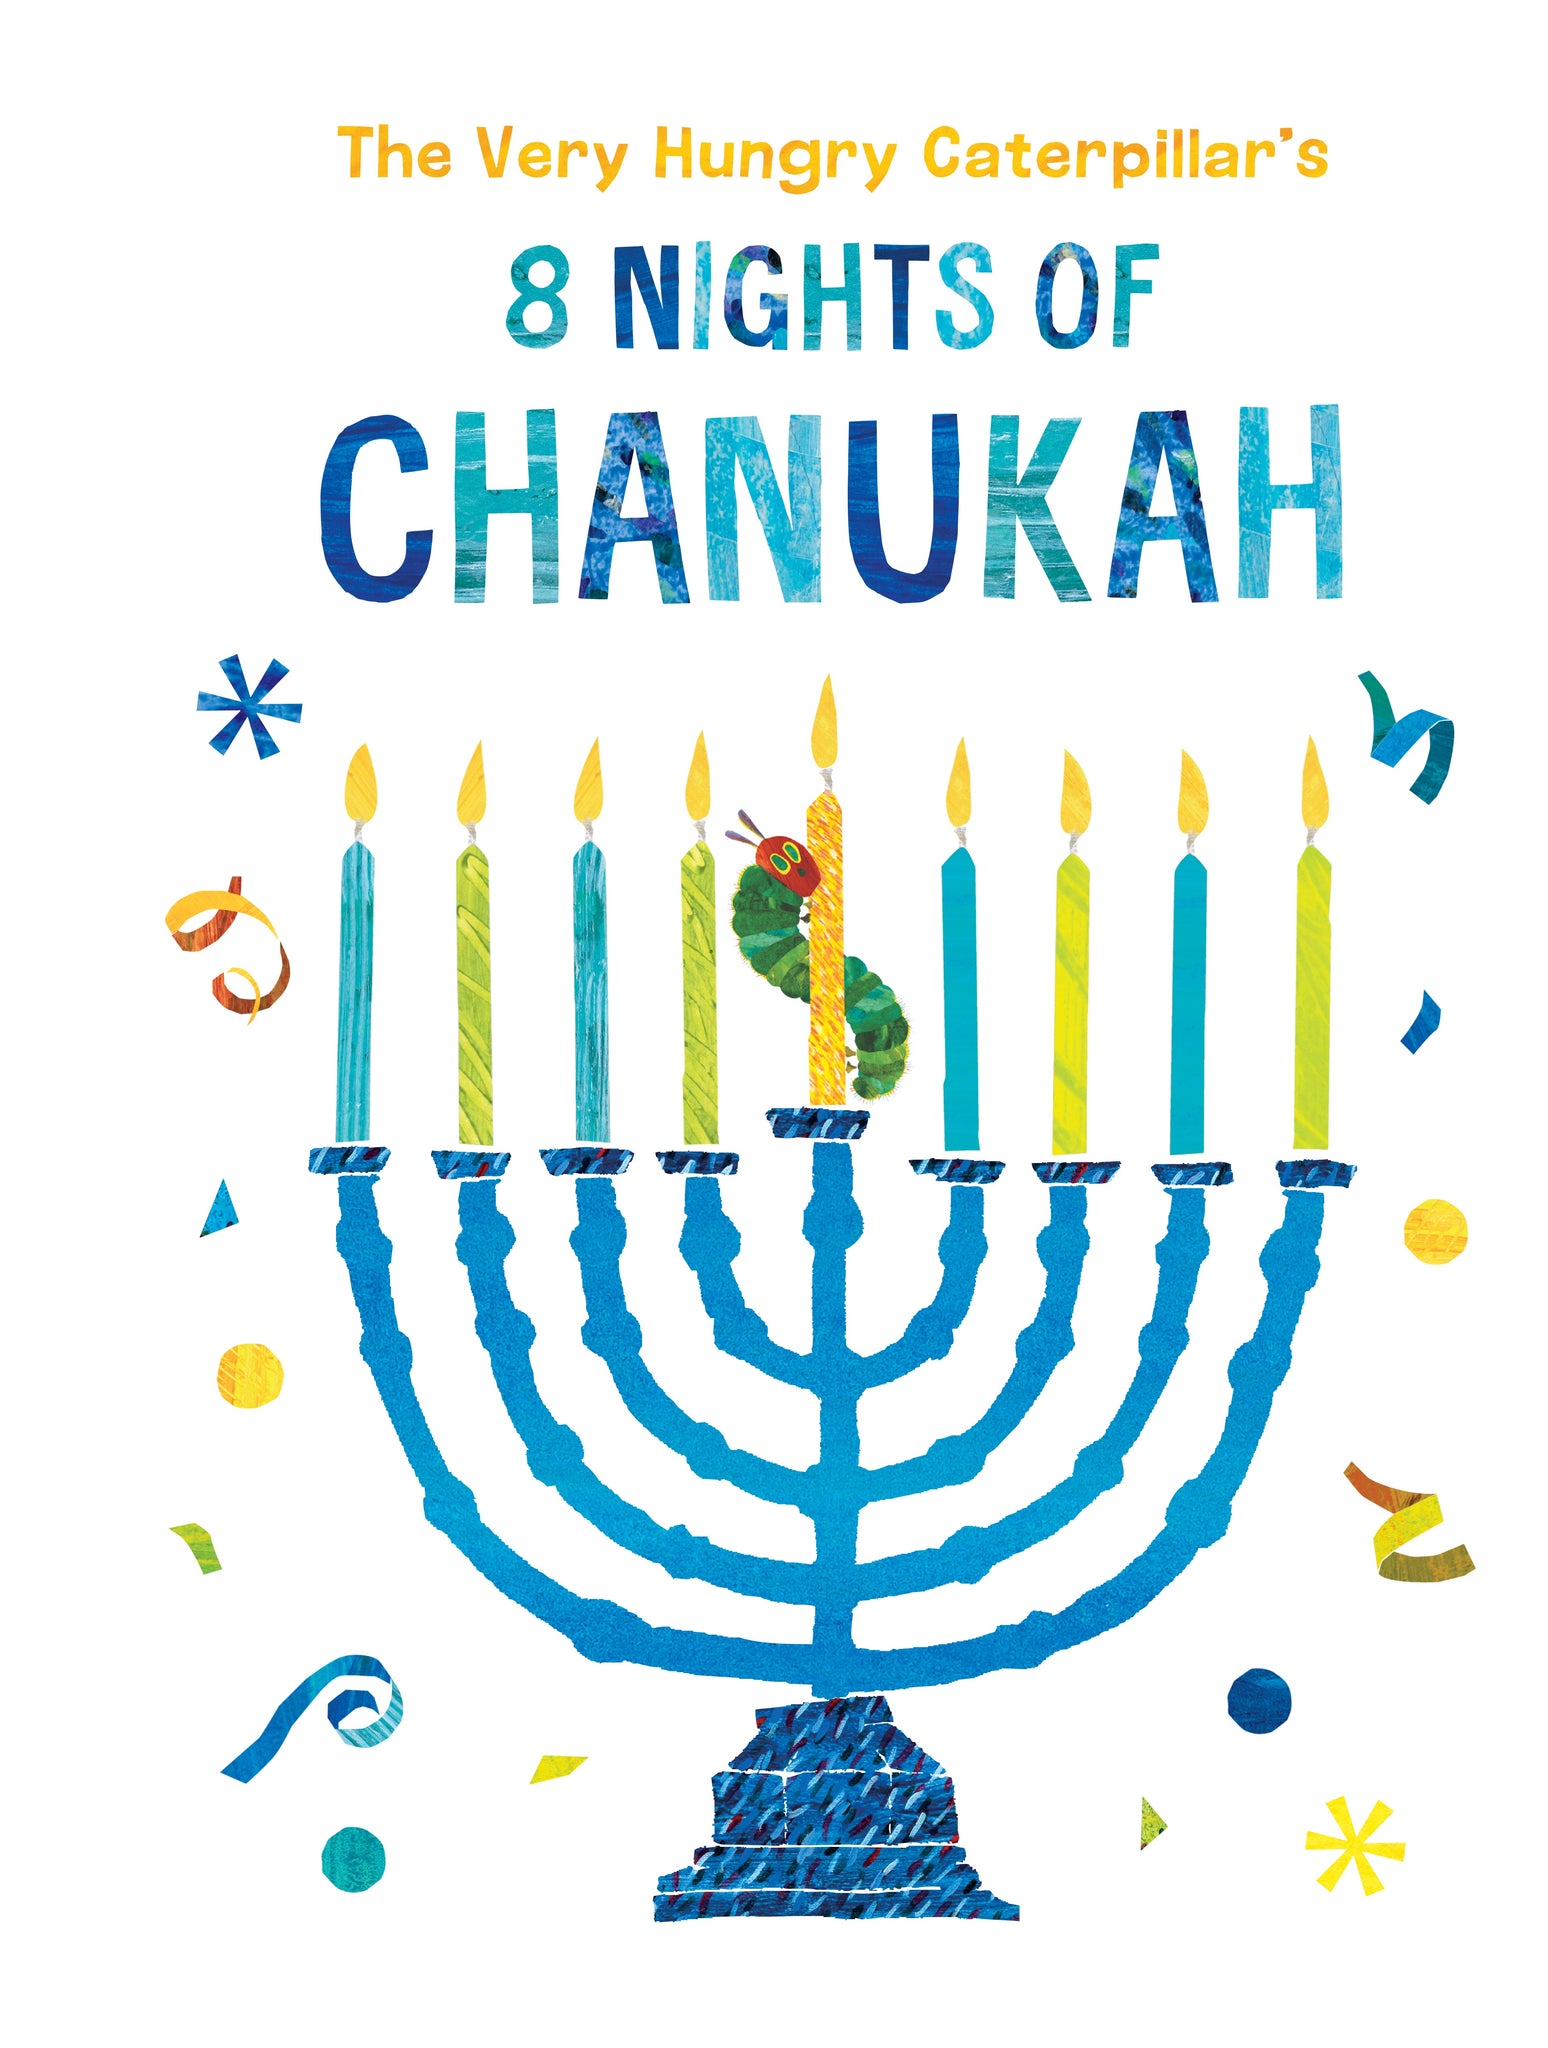 the very hungry caterpillar's 8 nights of chanukah